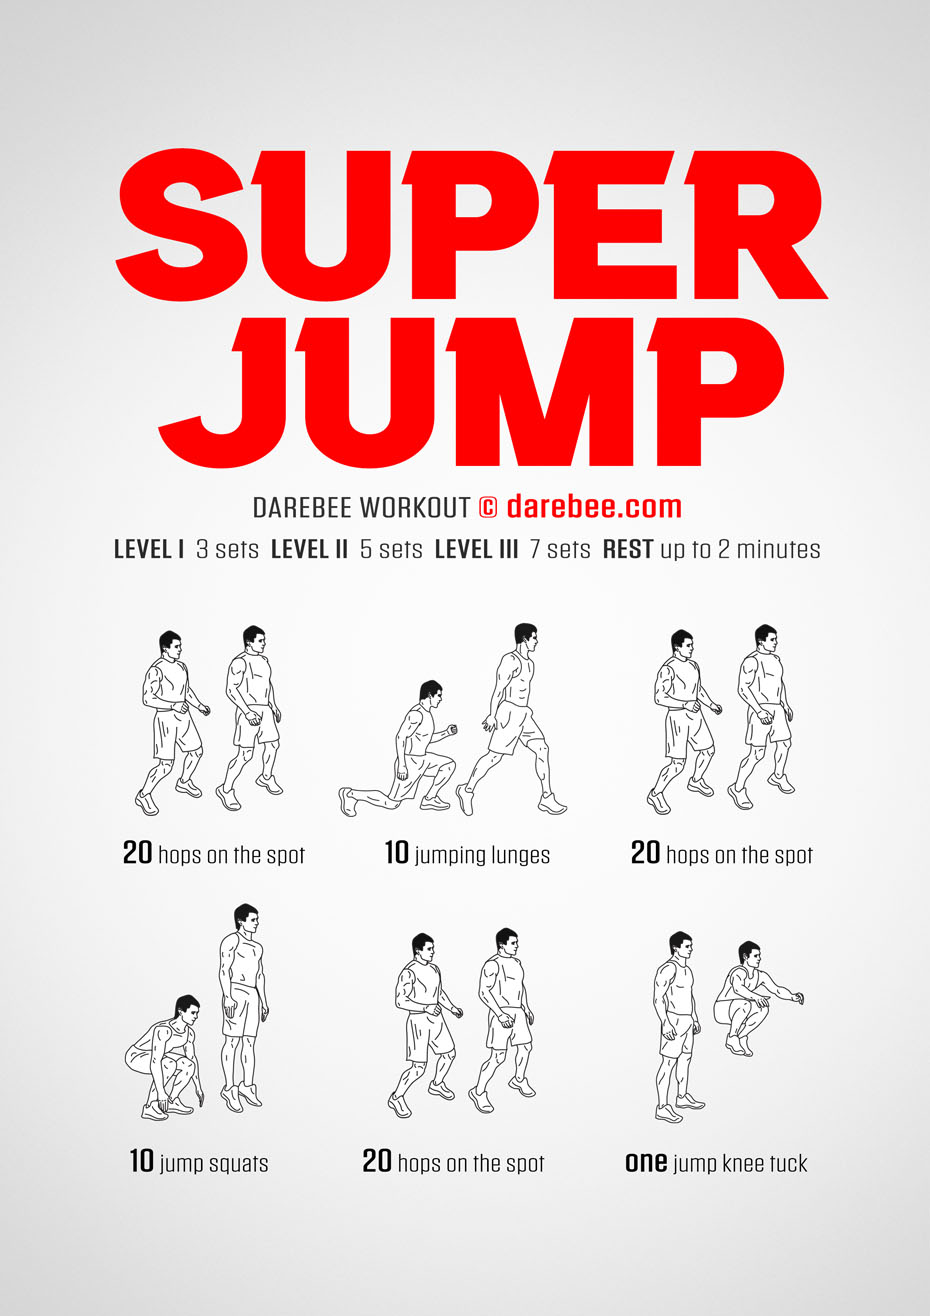 Super Jump is a Darebee home-fitness home-cardio workout that helps you develop amazing lower body strength.